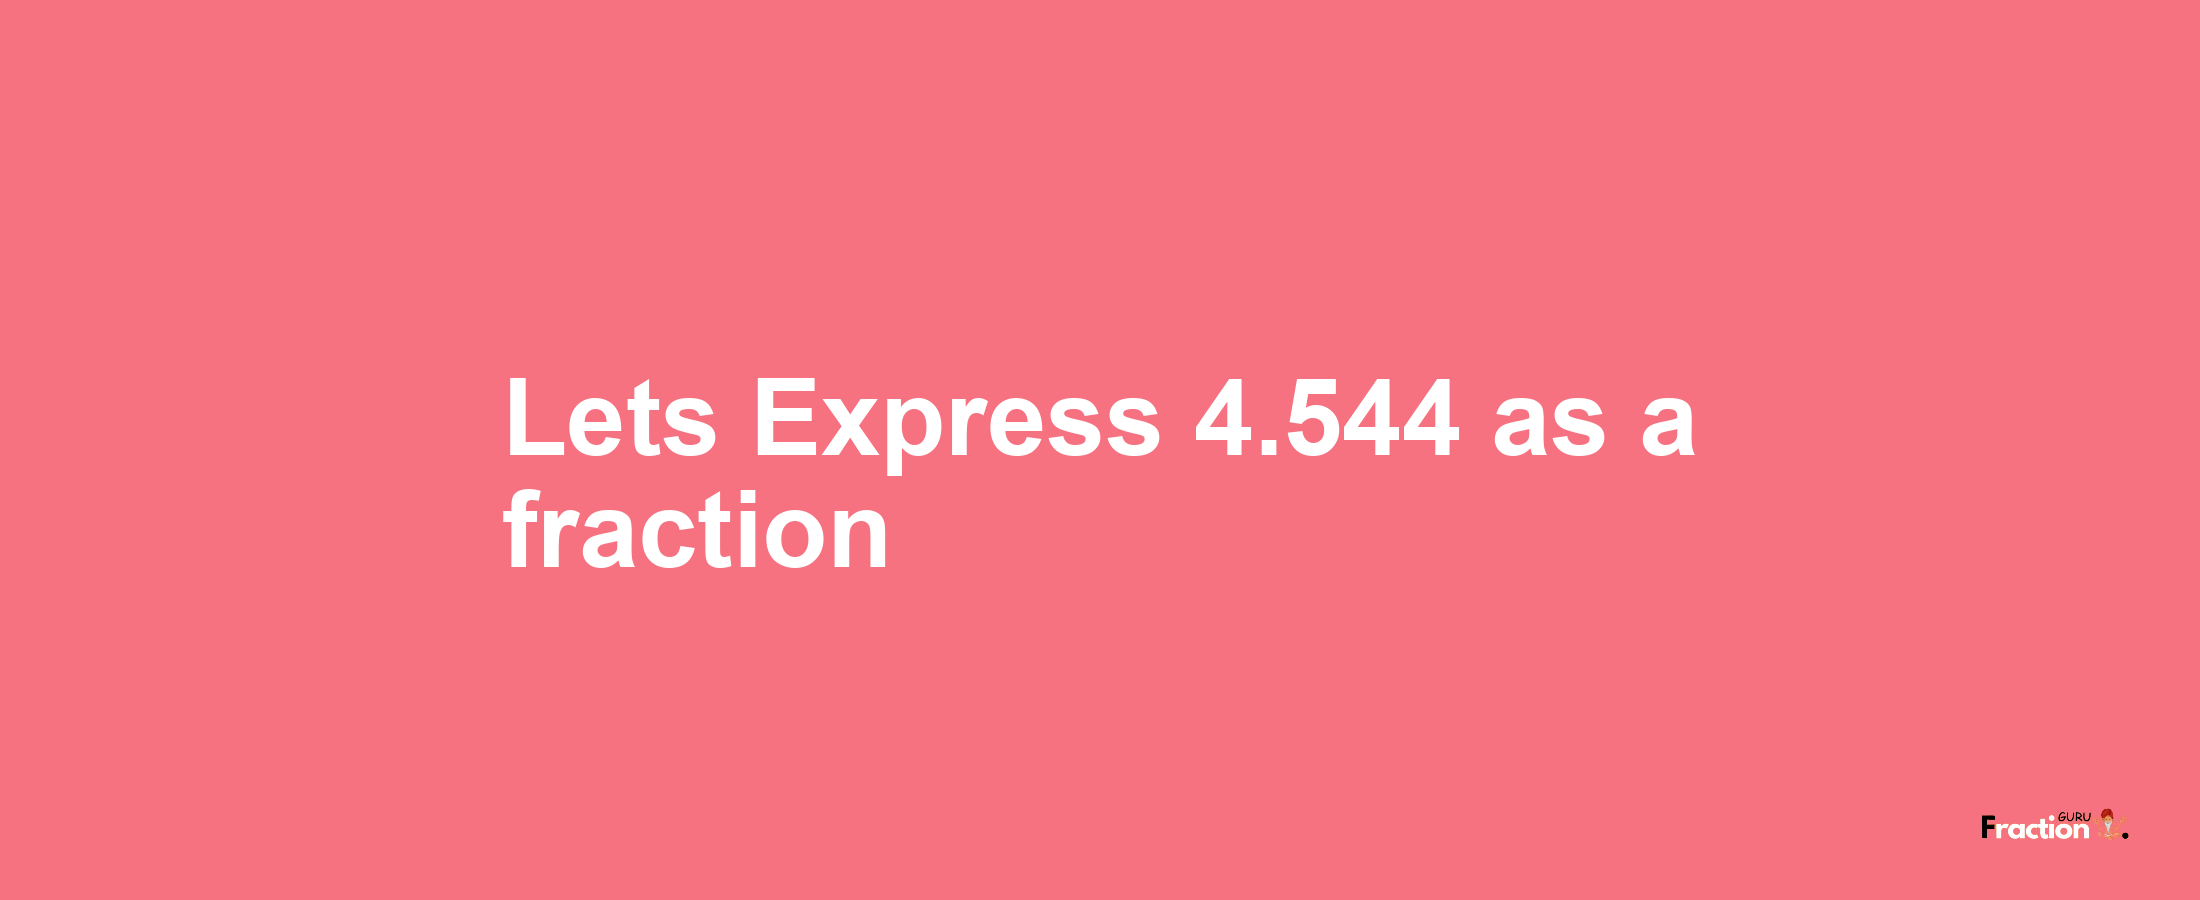 Lets Express 4.544 as afraction